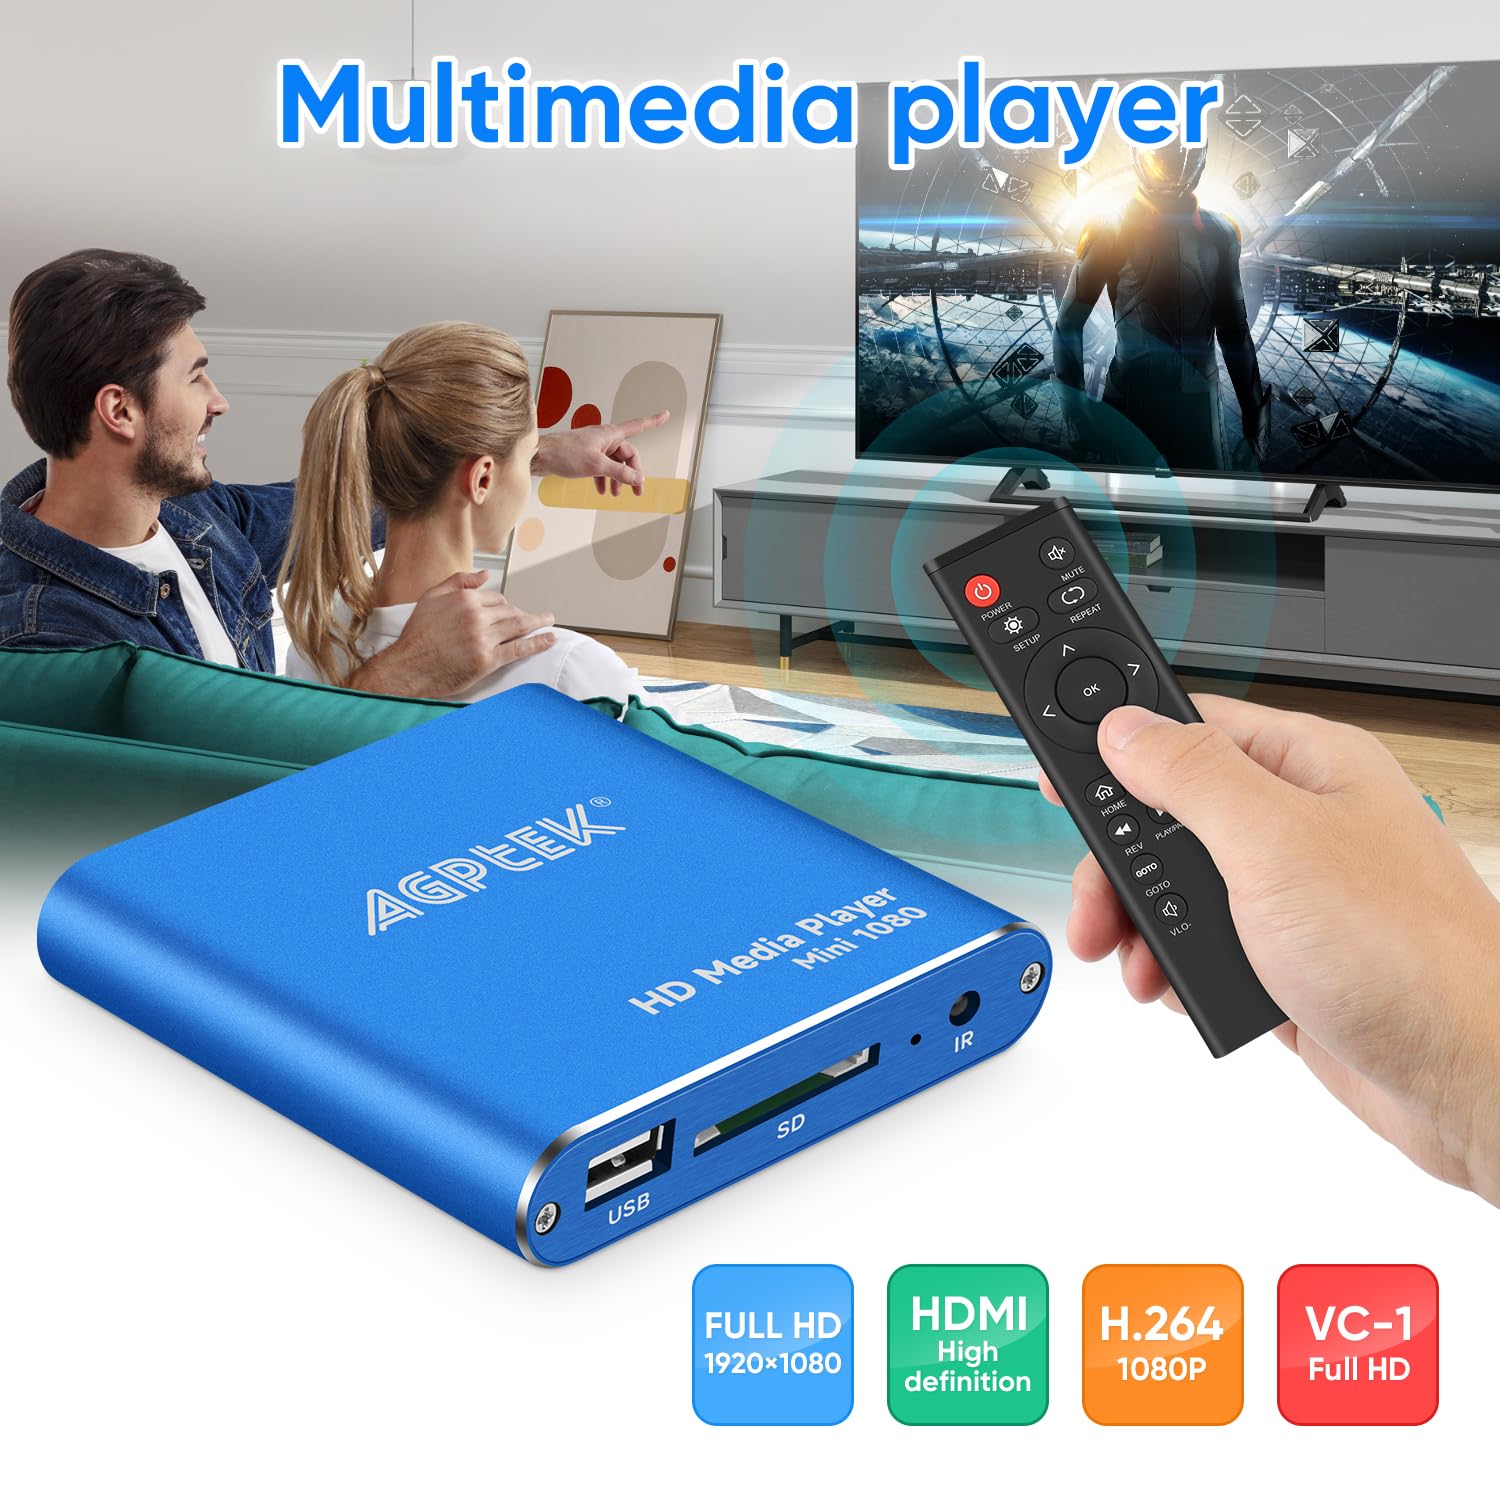 HDMI Media Player with One More AV Cable, Blue Mini 1080p Full-HD Ultra HDMI MP4 Player for -MKV/RM/ MP4 / AVI etc- HDD USB Flash Drive/HDD and SD Card